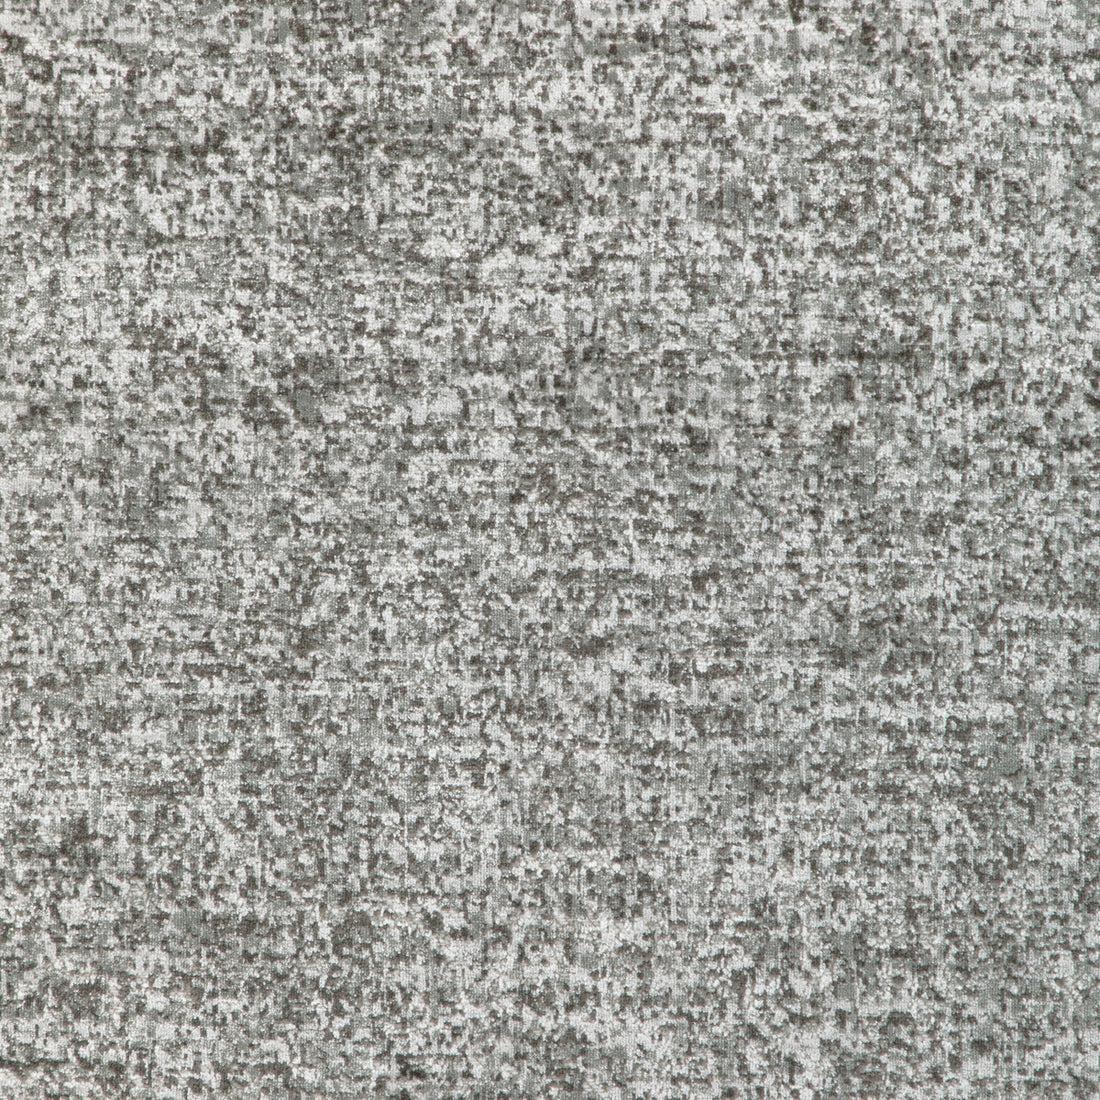 Giusuppe fabric in granite color - pattern 36954.21.0 - by Kravet Basics in the Mid-Century Modern collection